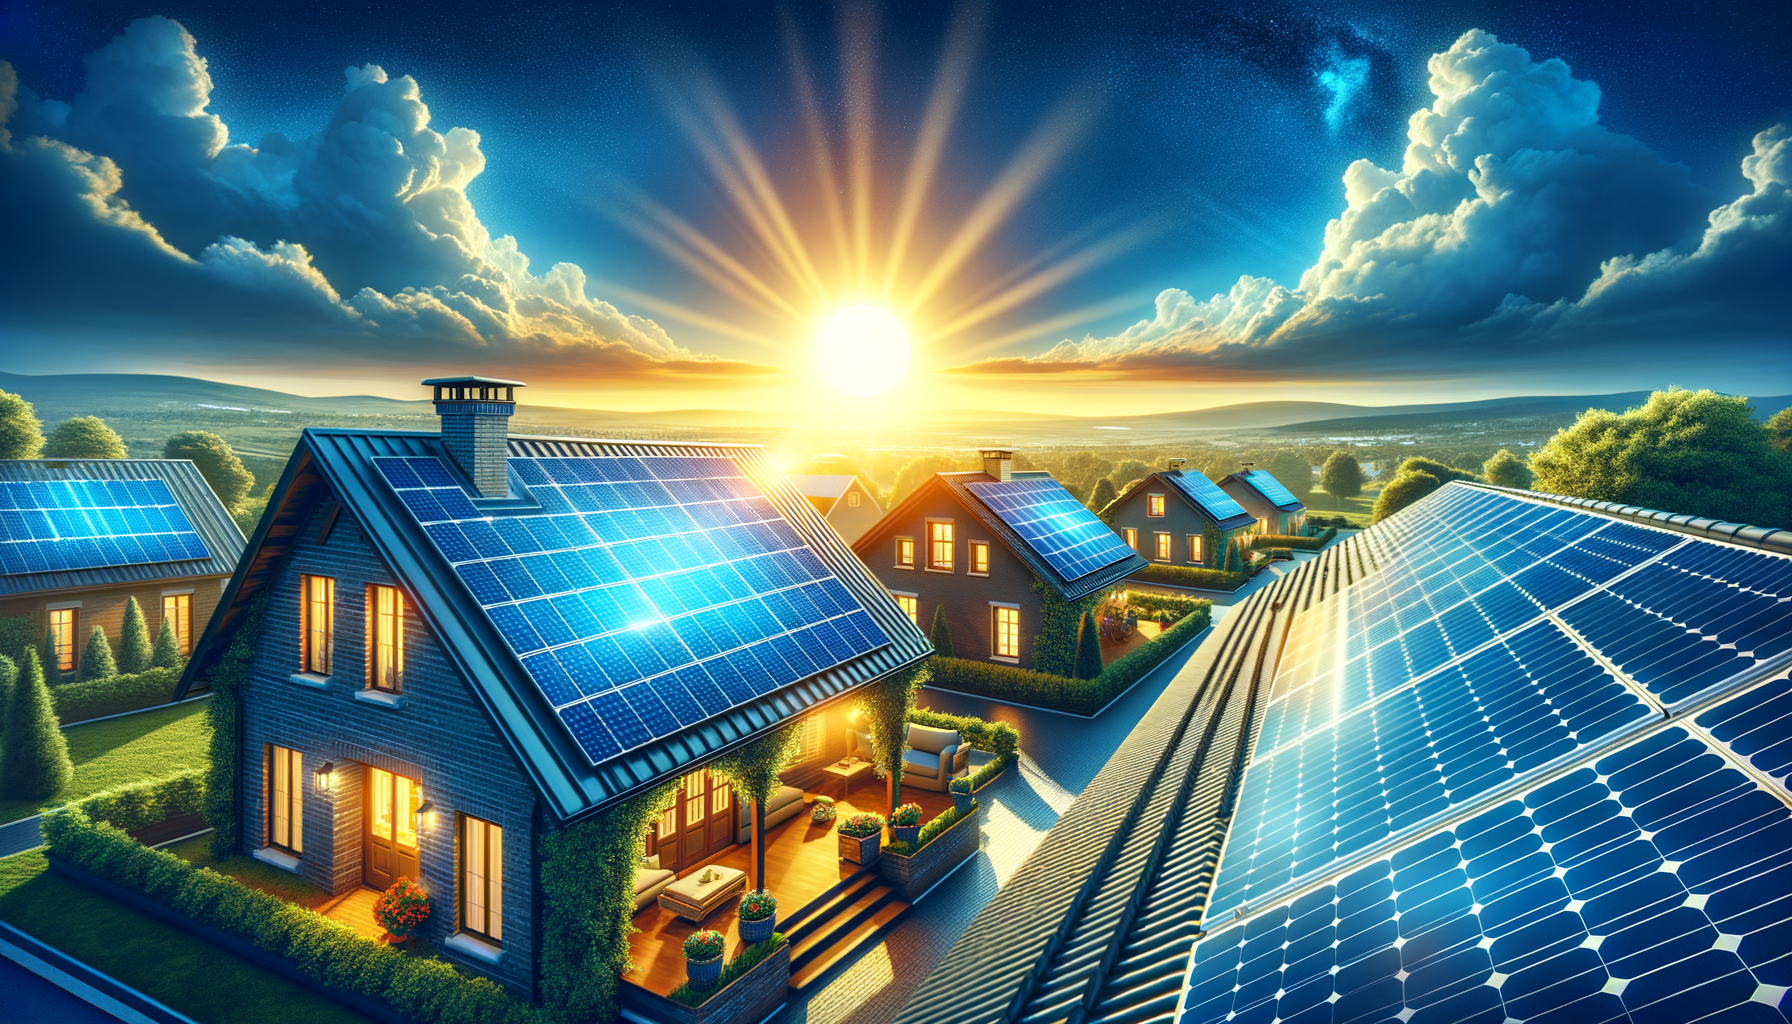 ALT: A sunny day showcasing the efficiency of solar panels